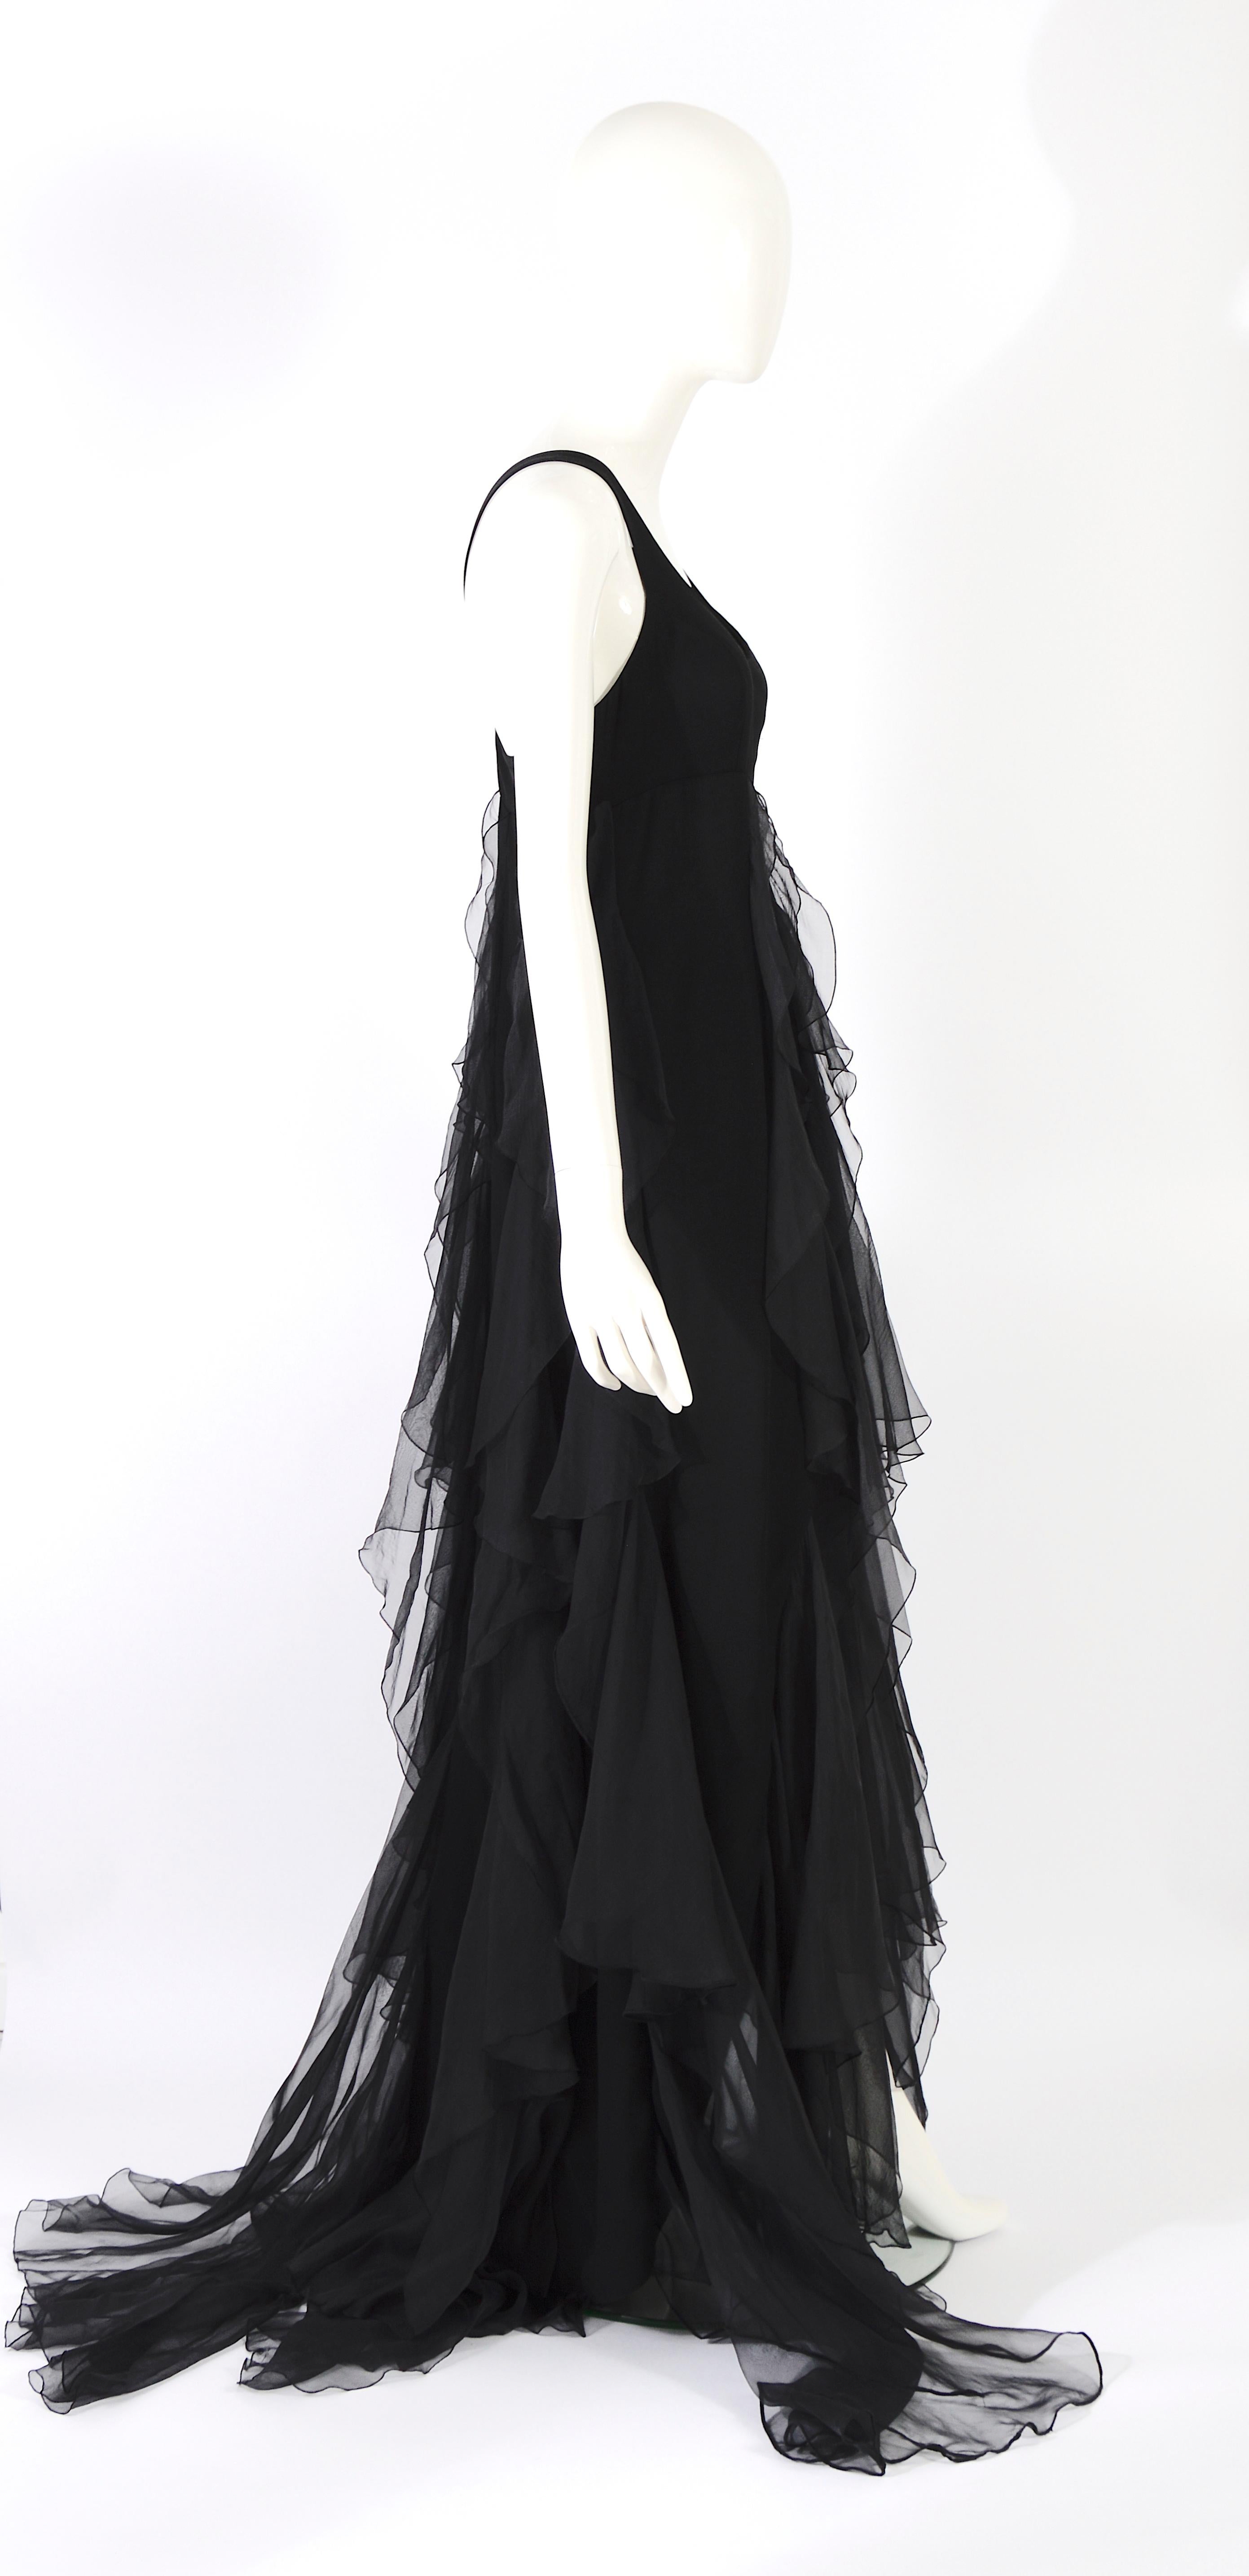 Christian Dior by Gianfranco Ferre S/S 1994 vintage black silk evening dress For Sale 5